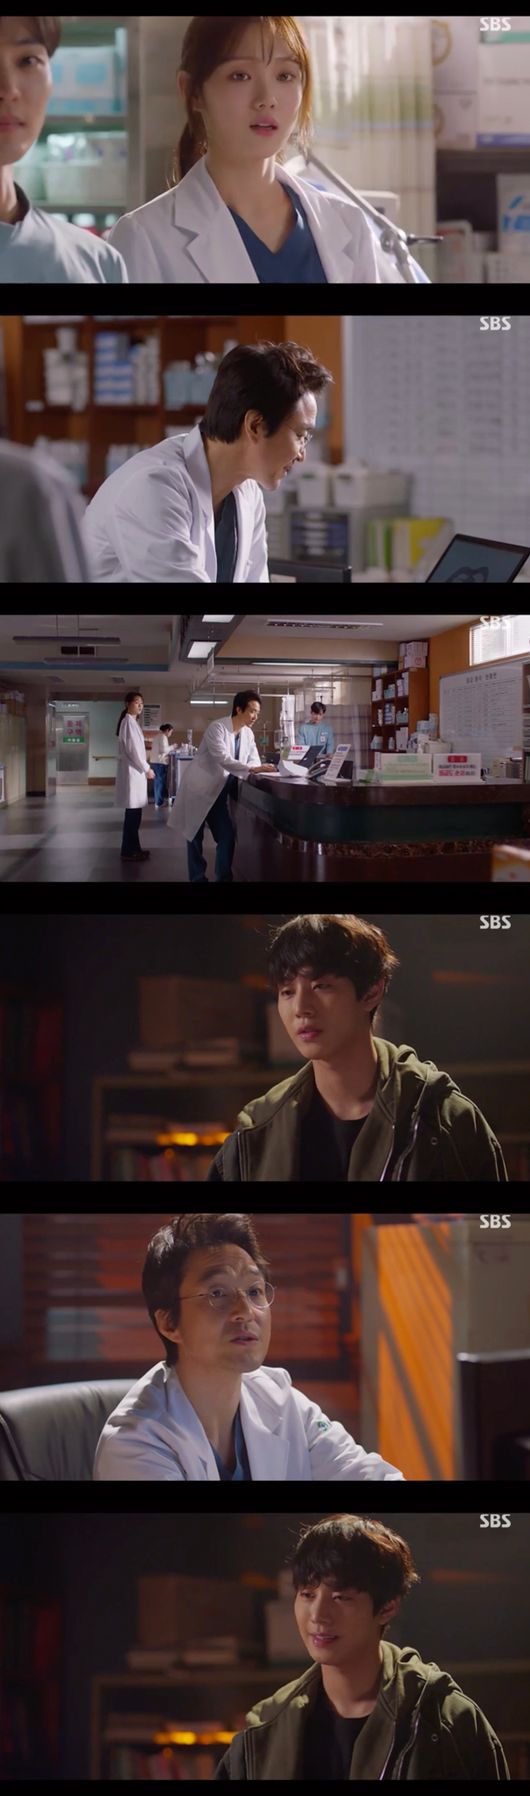 The heartfelt recognition of Han Suk-kyu, Romantic Doctor Kim Sabu 2, made Ahn Hyo-seop and Lee Sung-kyung feel better.In SBS Mondays drama Romantic Doctor Kim Sabu 2 (director Yoo In-sik Lee Gil-bok, playwright Kang Eun-kyung), Kim Sabu (Han Suk-kyu) was shown to lead Seo Woo Jin (Ahn Hyo-seop) and Cha Eun-jae (Lee Sung-kyung).On this day, Seo Woo Jin entered Park Min-guks operating room according to Kims instructions.Seo Woo Jin knew that all the situations were recorded, but he informed Park Min-guk (Kim Joo-heon) that he had performed the first surgery without CT confirmation.The operation without CT confirmation was an inevitable choice for an emergency patient, but it was a good factor to use the dumping if the patients surgery failed in the future.Sure enough, the second surgery was not completed properly due to Yang Ho-joons mistake.The surgery was performed by the Korean Military Secretary, who said he would sue Kim Sa-bu and Doldam Hospital for medical malpractice.Jang Gi-tae (played by Lim Won-hee) thought that the video showing Seo Woo Jin mentioning whether CT is confirmed would make the situation even more disadvantageous.Thanks to this, all Misunderstood arrows were plugged into Seo Woo Jin.However, the surgery video was necessary to solve the injustice of Kim Sabu, and Park Min-guk and Yang Ho-joon tried to hide it.Cha Eun-jae found a USB with a video in the threat of Yang Ho-joon to stop his mouth, and all the truth was revealed.In addition, Cha Eun-jae surprised Kim Sabu by dealing with emergency patients. When Cha Eun-jae confidently said, Its okay if its not in the operating room, Kim said, Follow well to the end.It is your first patient. Cha Eun-jae showed his first recognition as a Physician for Kim Sabu.The relationship between Kim Sa-bu and Seo Woo Jin has deepened, too: Kim Sa-bu handed 10 million won to Seo Woo Jin, while saying, Put back a million won each month.Im going to be stuck for ten months, said Seo Woo Jin, who realized that Kim Sabu was Missunderstood. Kim Sabu said, Im saying this is a jargon.In other words, its romantic, he added.Seo Woo Jin recounted Kim Sa-bus unexpected behavior as a strange hospital, a strange person, strange adults.At that moment, the lenders came, and Seo Woo Jin thought, And my fucking reality, I can find the answer.Kim Sabu gives appropriate prescriptions to Seo Woo Jin and Cha Eun-jae, who have different vulnerabilities, and helps them become true Physicians.So, Seo Woo Jin and Cha Eun-jae are gradually growing up after realizing Kim Sa-bus sincerity. As the sum of the three people is getting more and more right, attention is focused on future development.Romantic Doctor Kim Sabu 2 is broadcast every Monday and Tuesday at 9:40 pm.Romantic Doctor Kim Sa-bu 2.